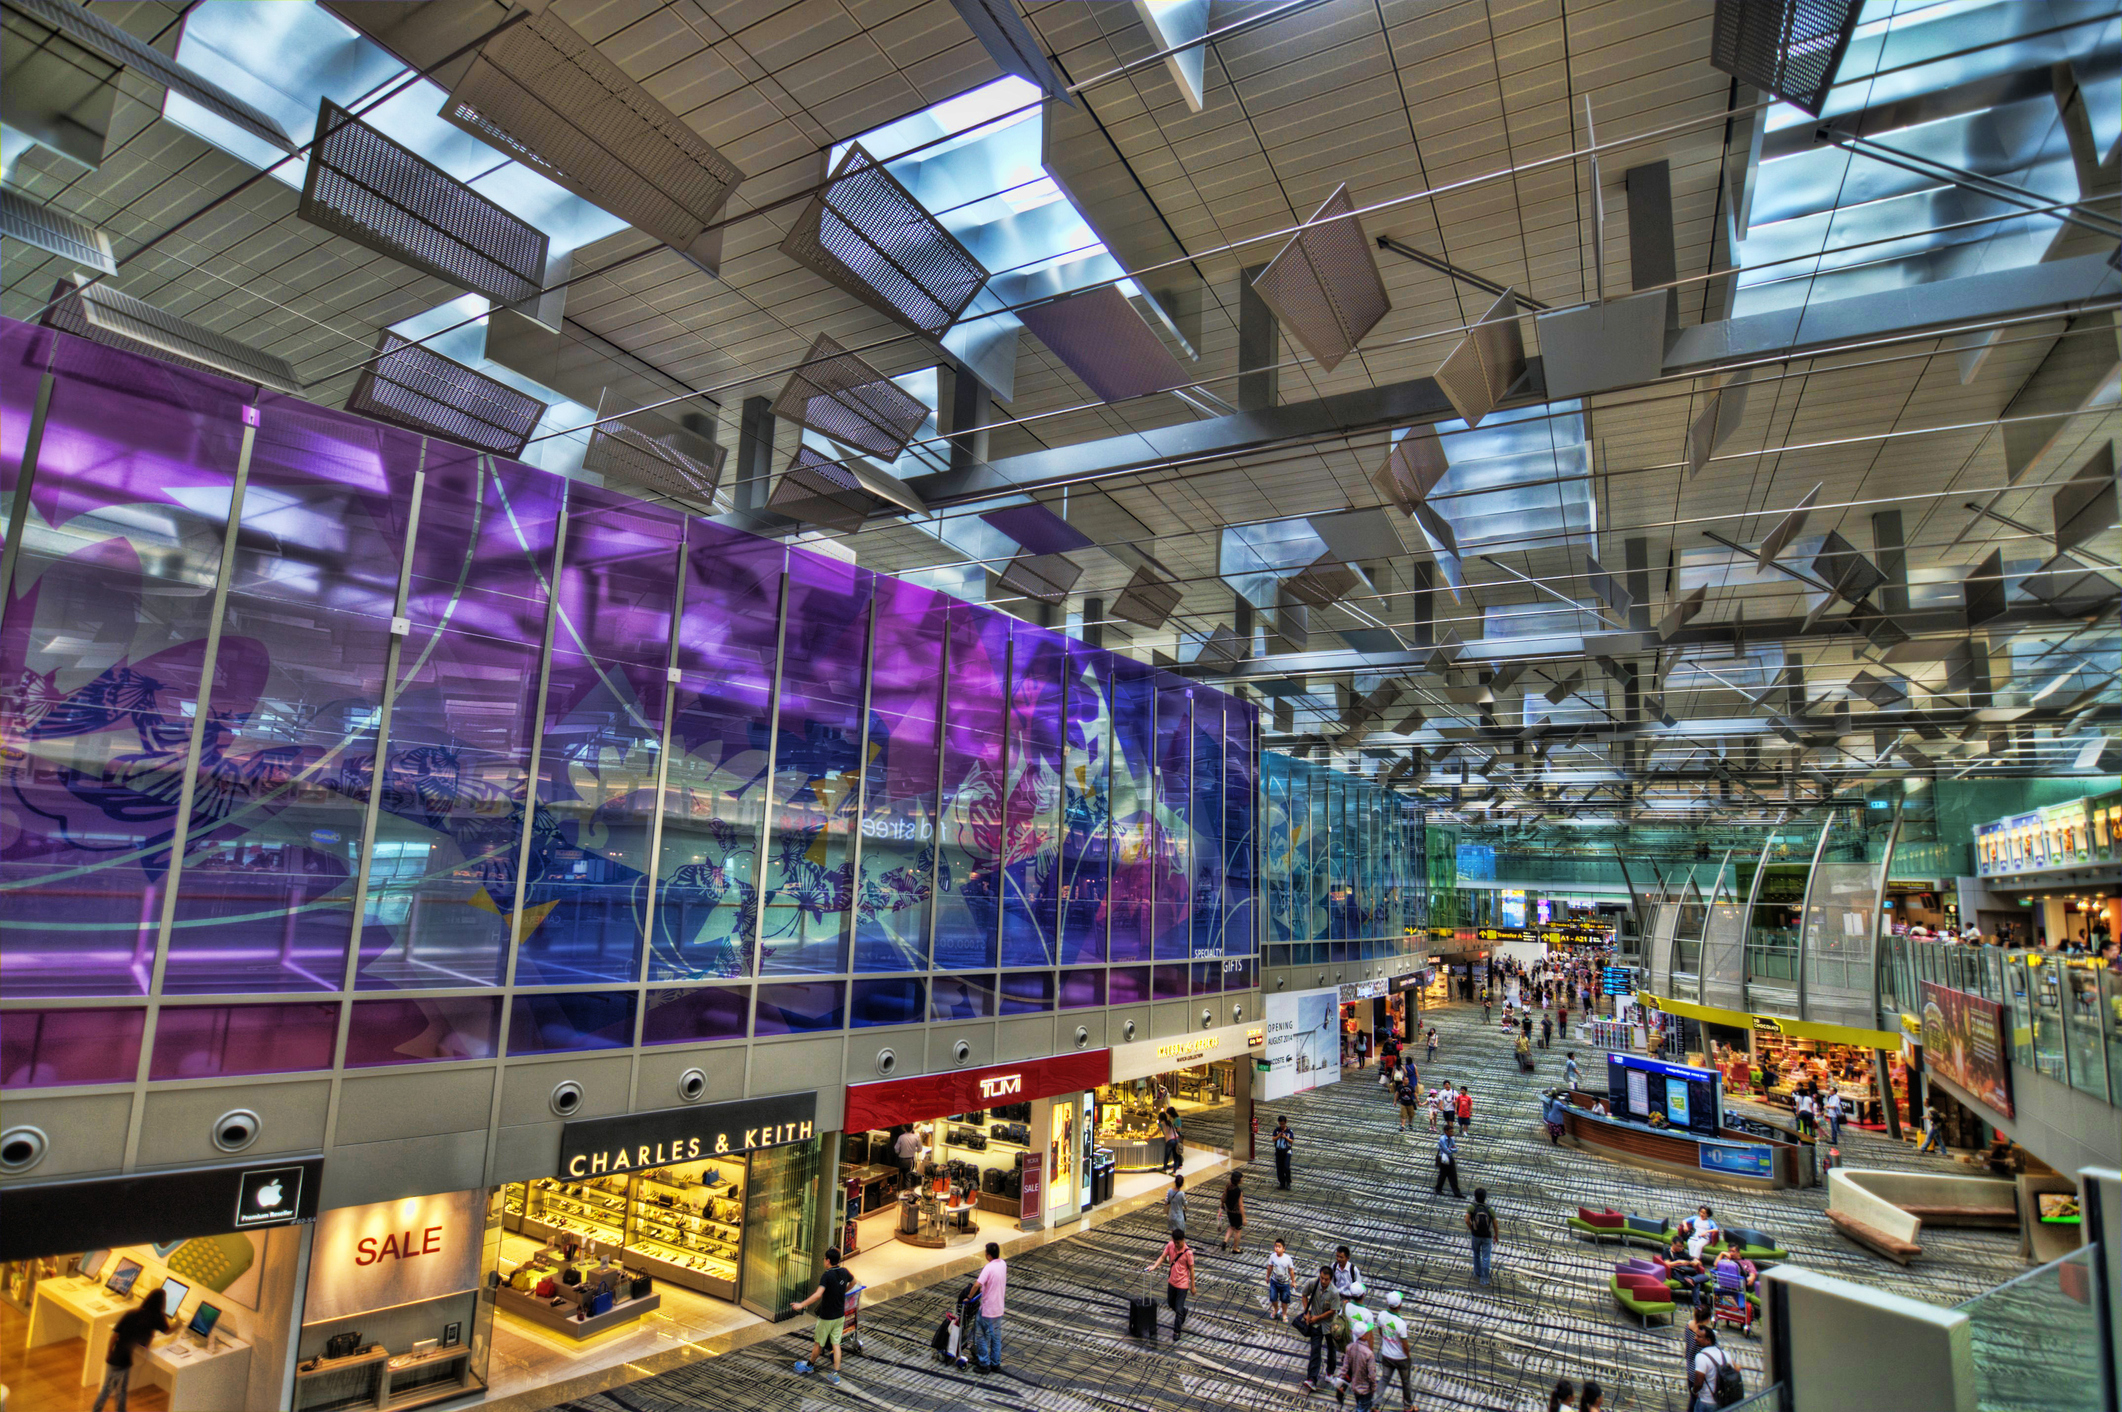 Terminal 3 at the Changi Airport, Singapore. (Wajahat—Getty Images)